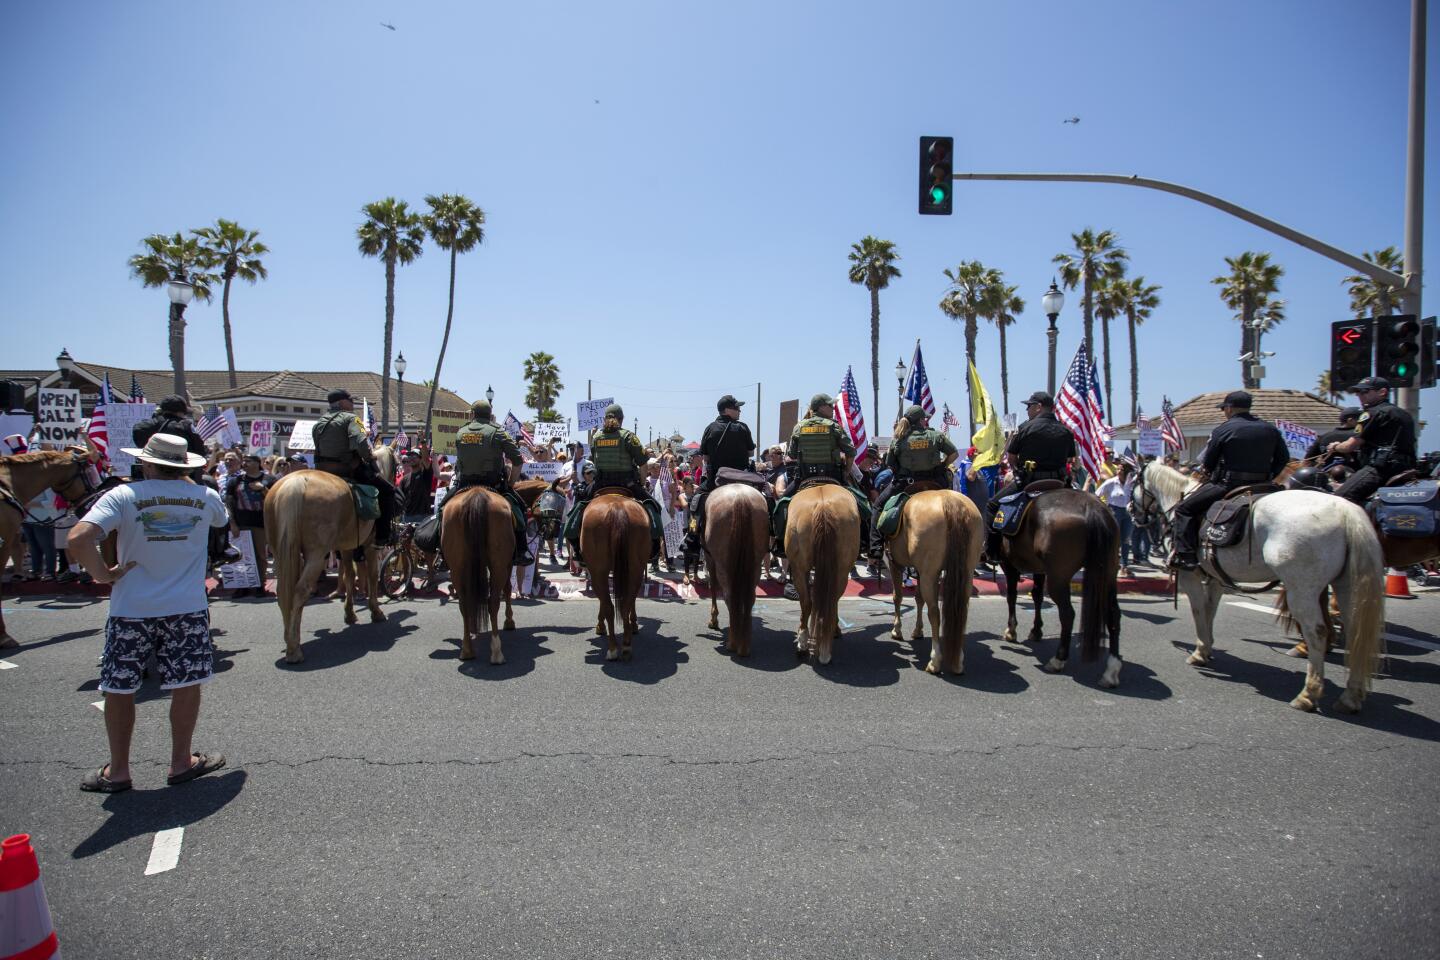 Members of the Orange County Sheriff's Department attempt to keep protesters on the sidewalk at the corners of Main Street and Pacific Coast Highway in Huntington Beach on Friday.